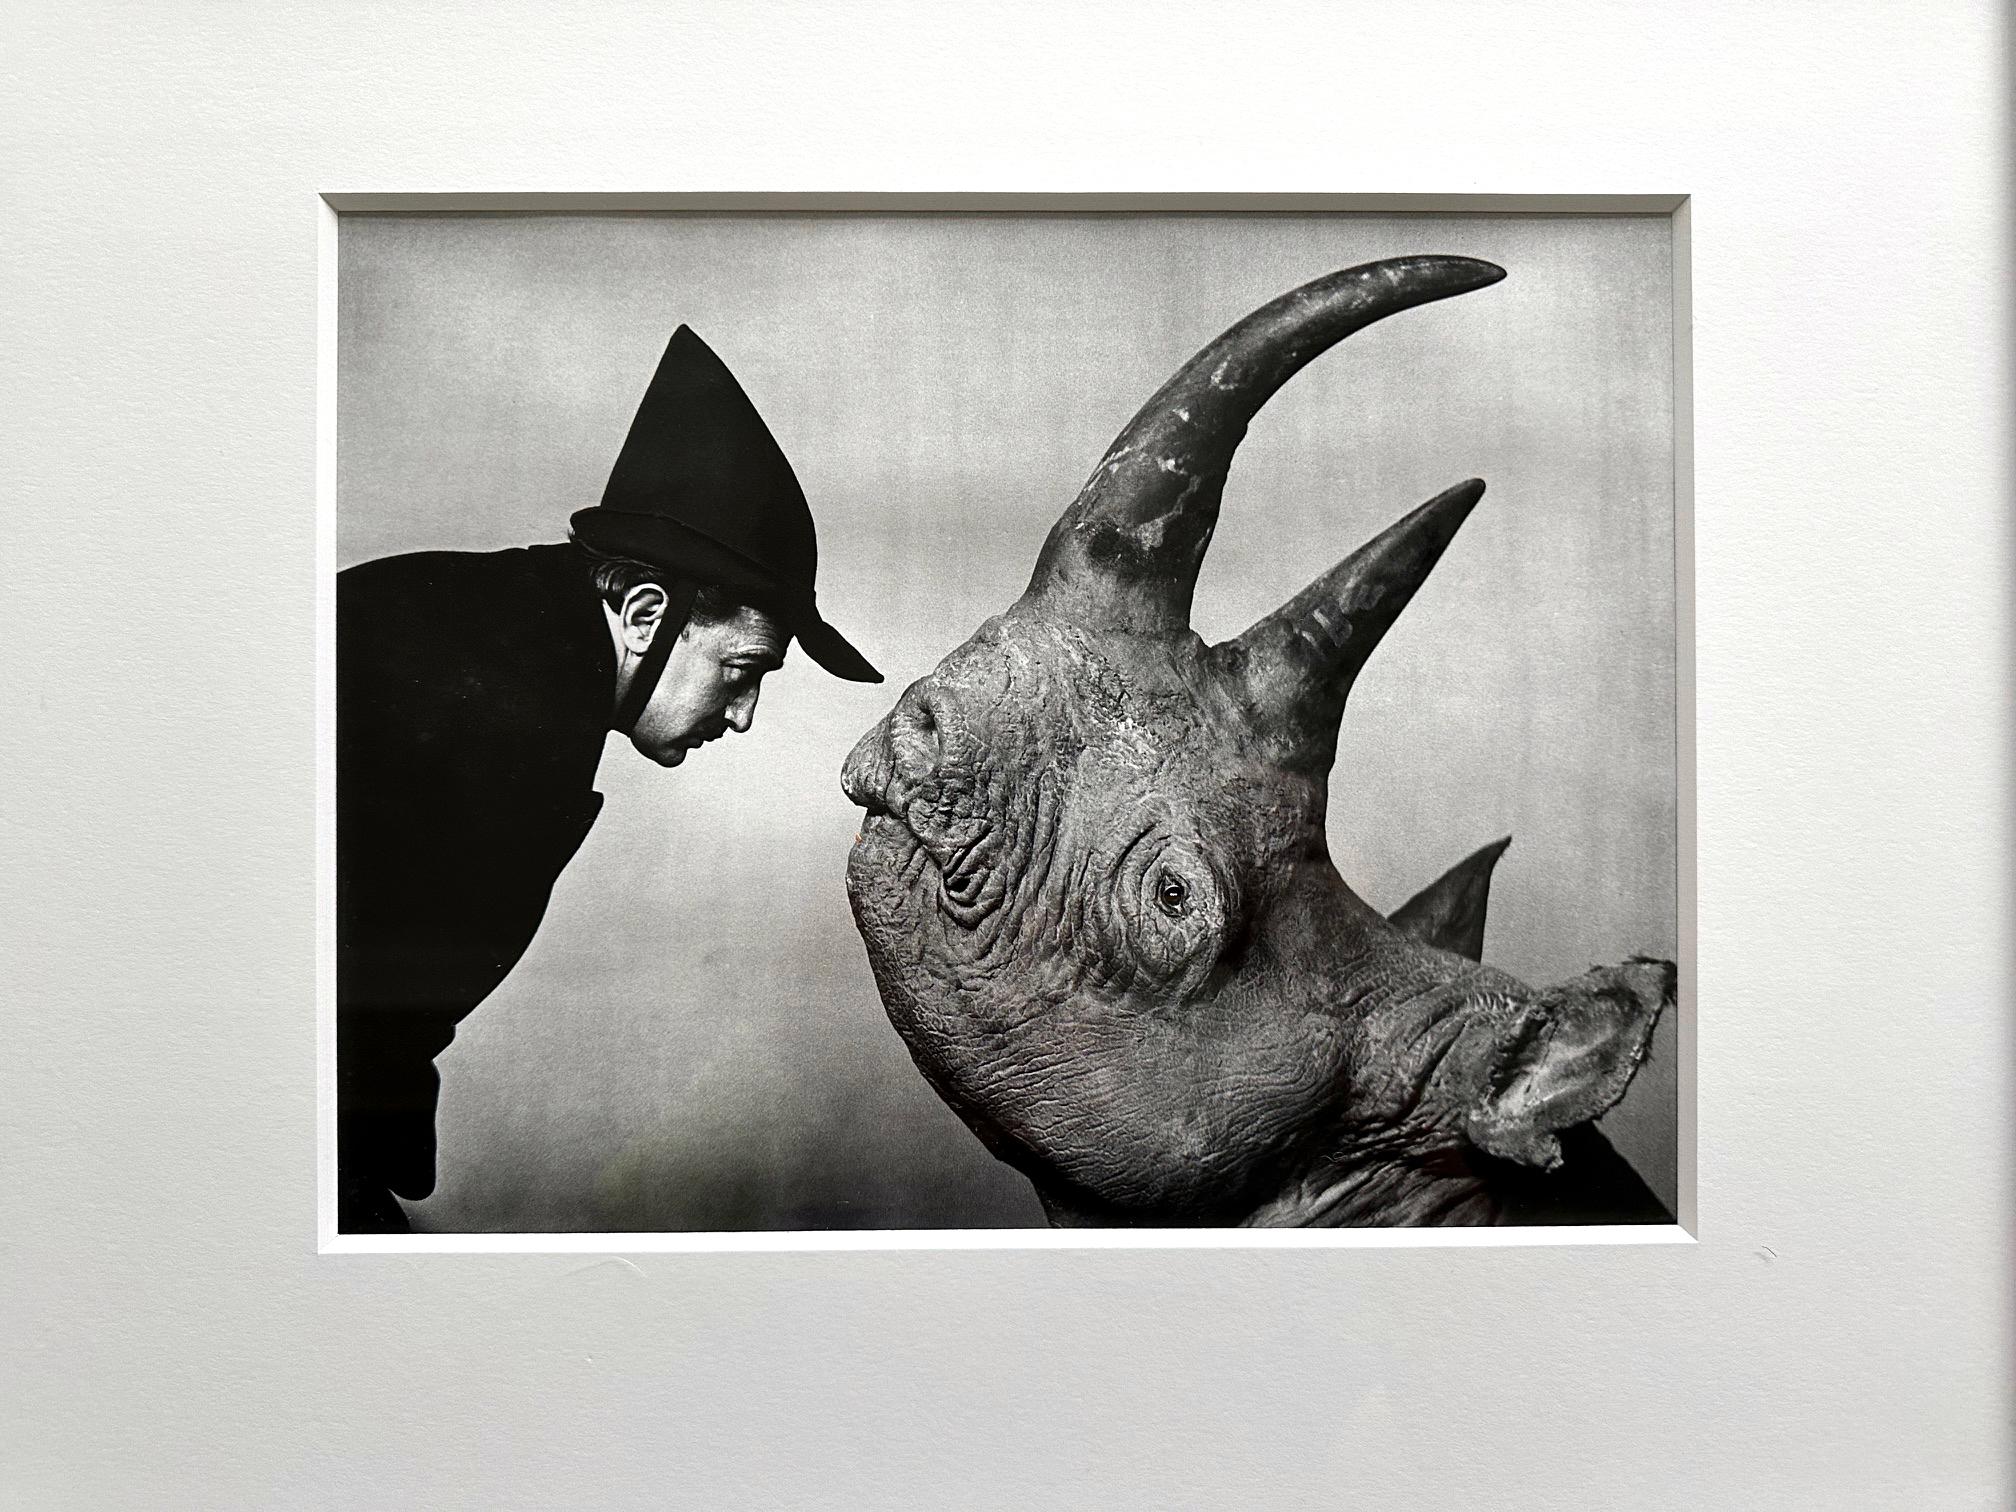 Modern Framed Editioned Dali Photograph by Philippe Halsman For Sale